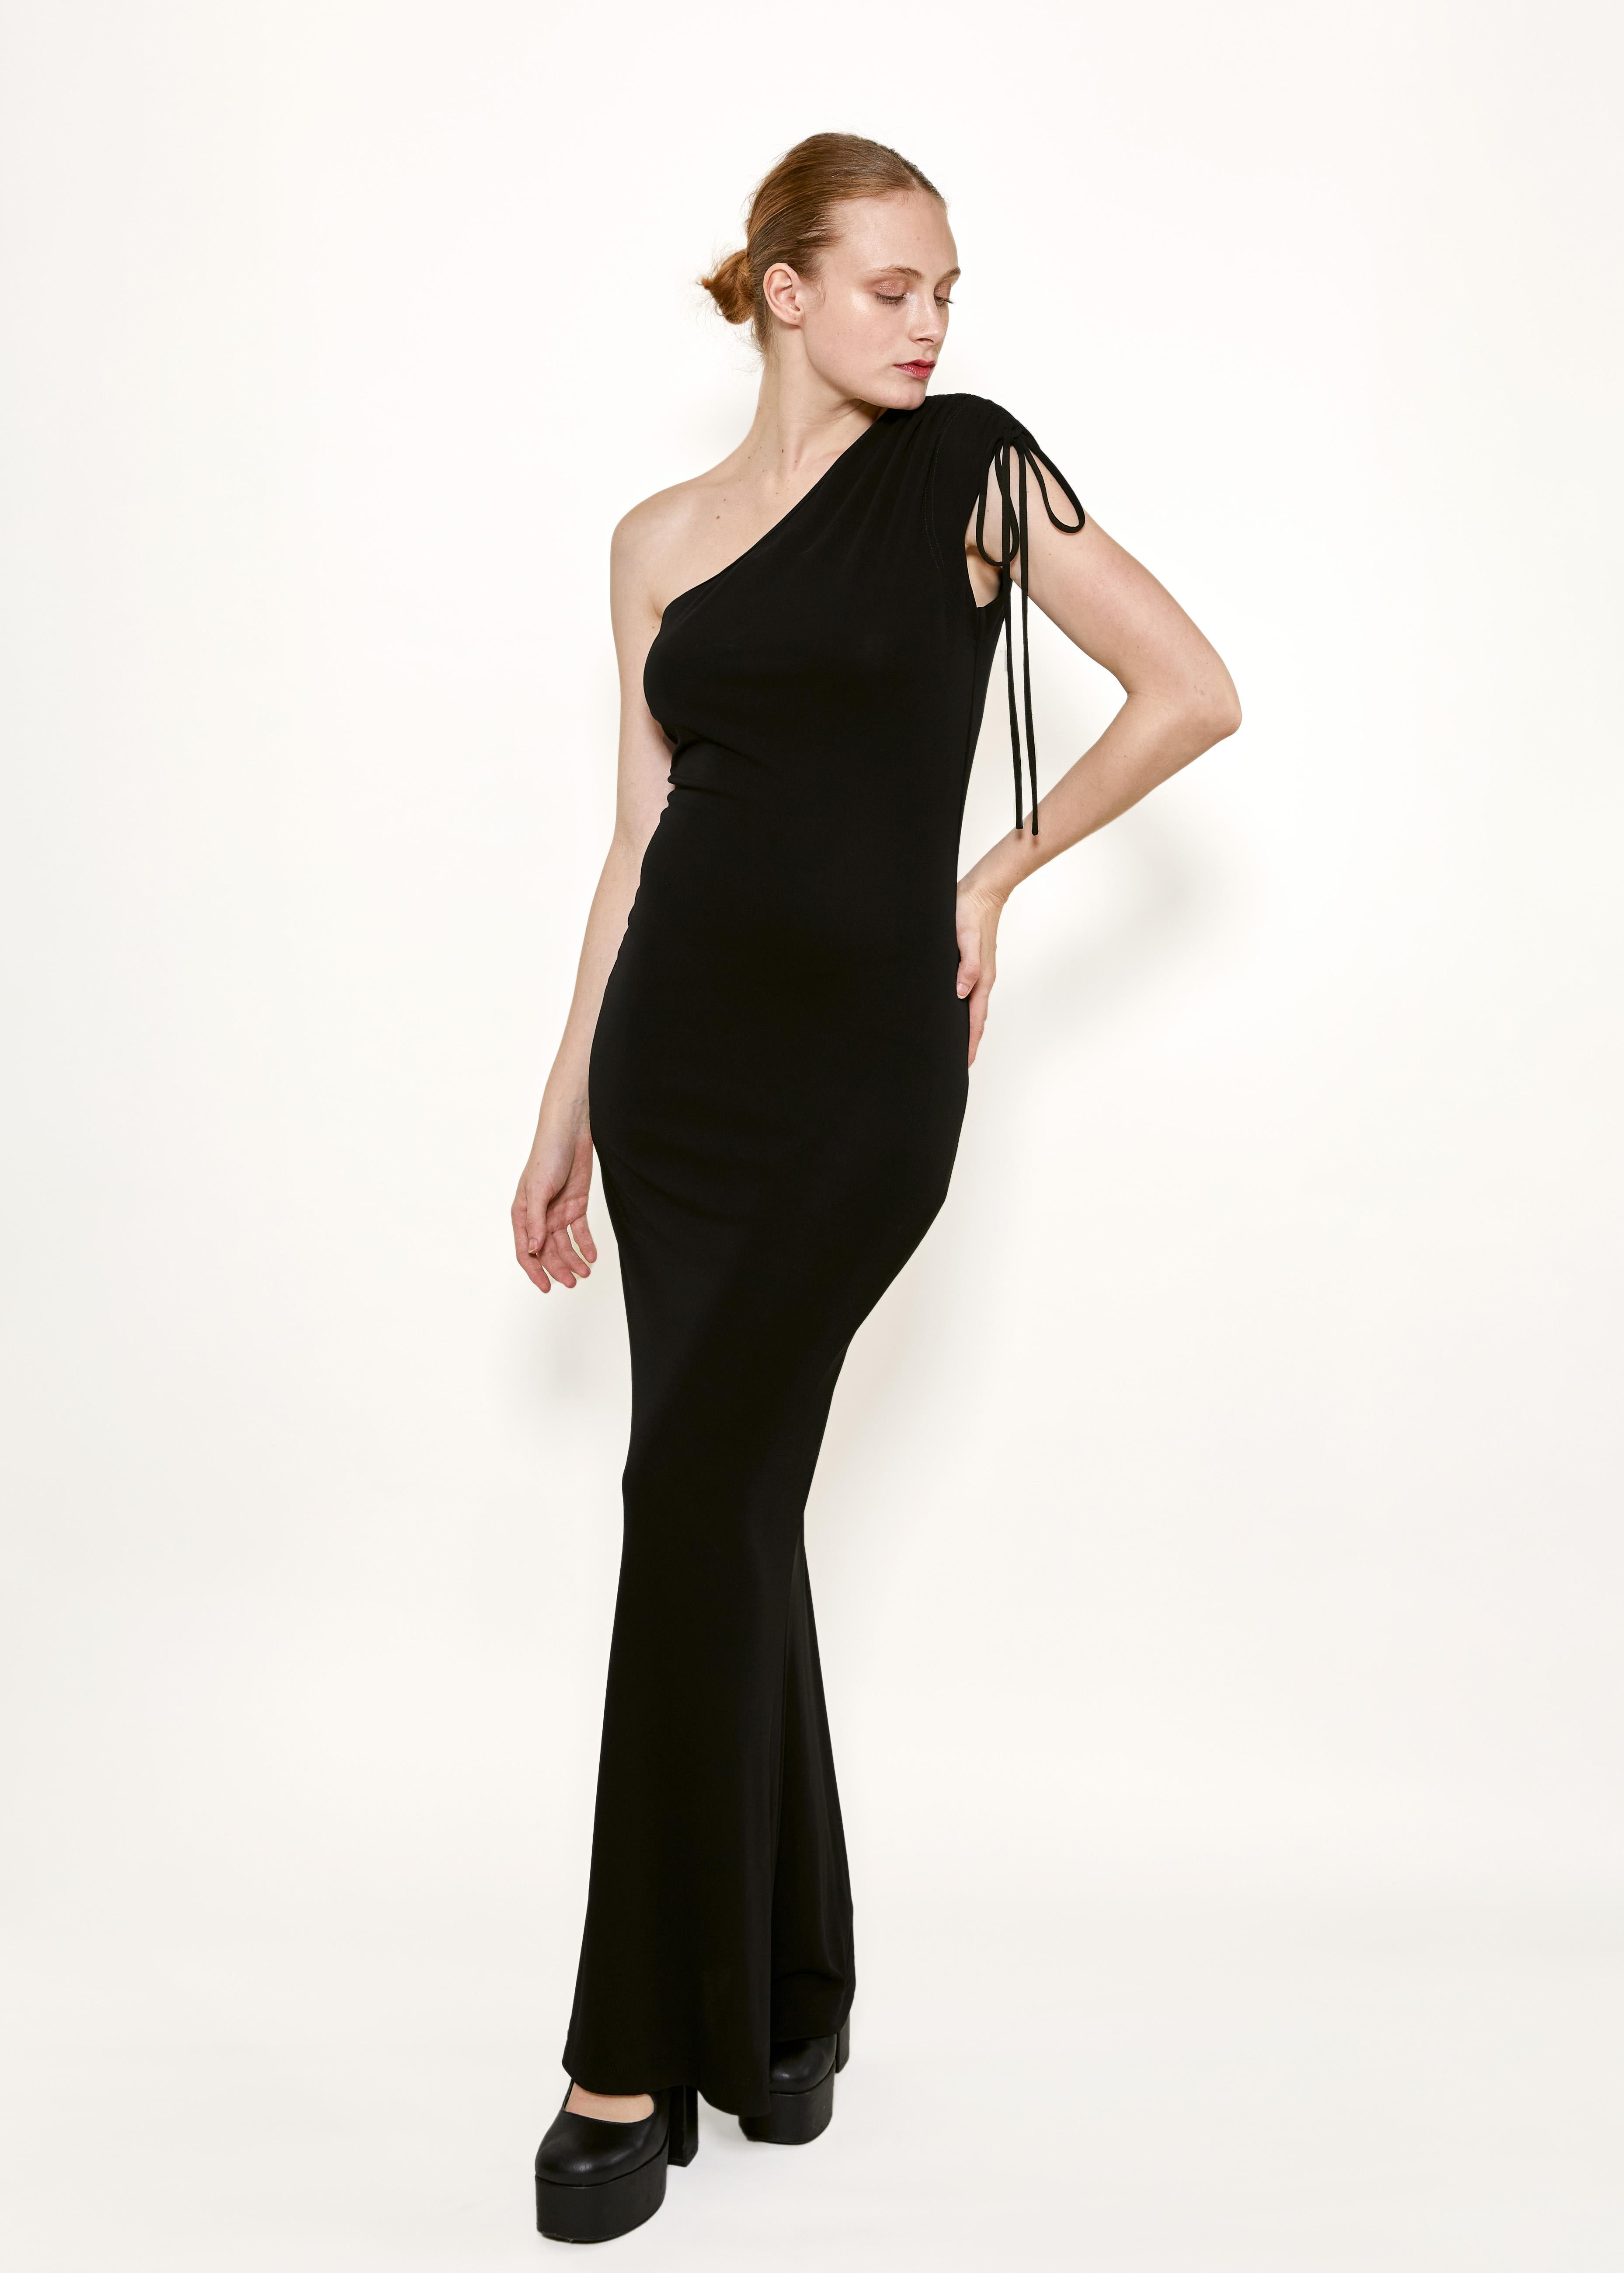 Indulge in luxury with the Vivienne Westwood Gold Label Black Jersey One Shoulder Dress. This couture piece features a drawstring shoulder for a unique touch, while its maxi length adds grace and elegance. The jersey fabric brings a stretchiness to